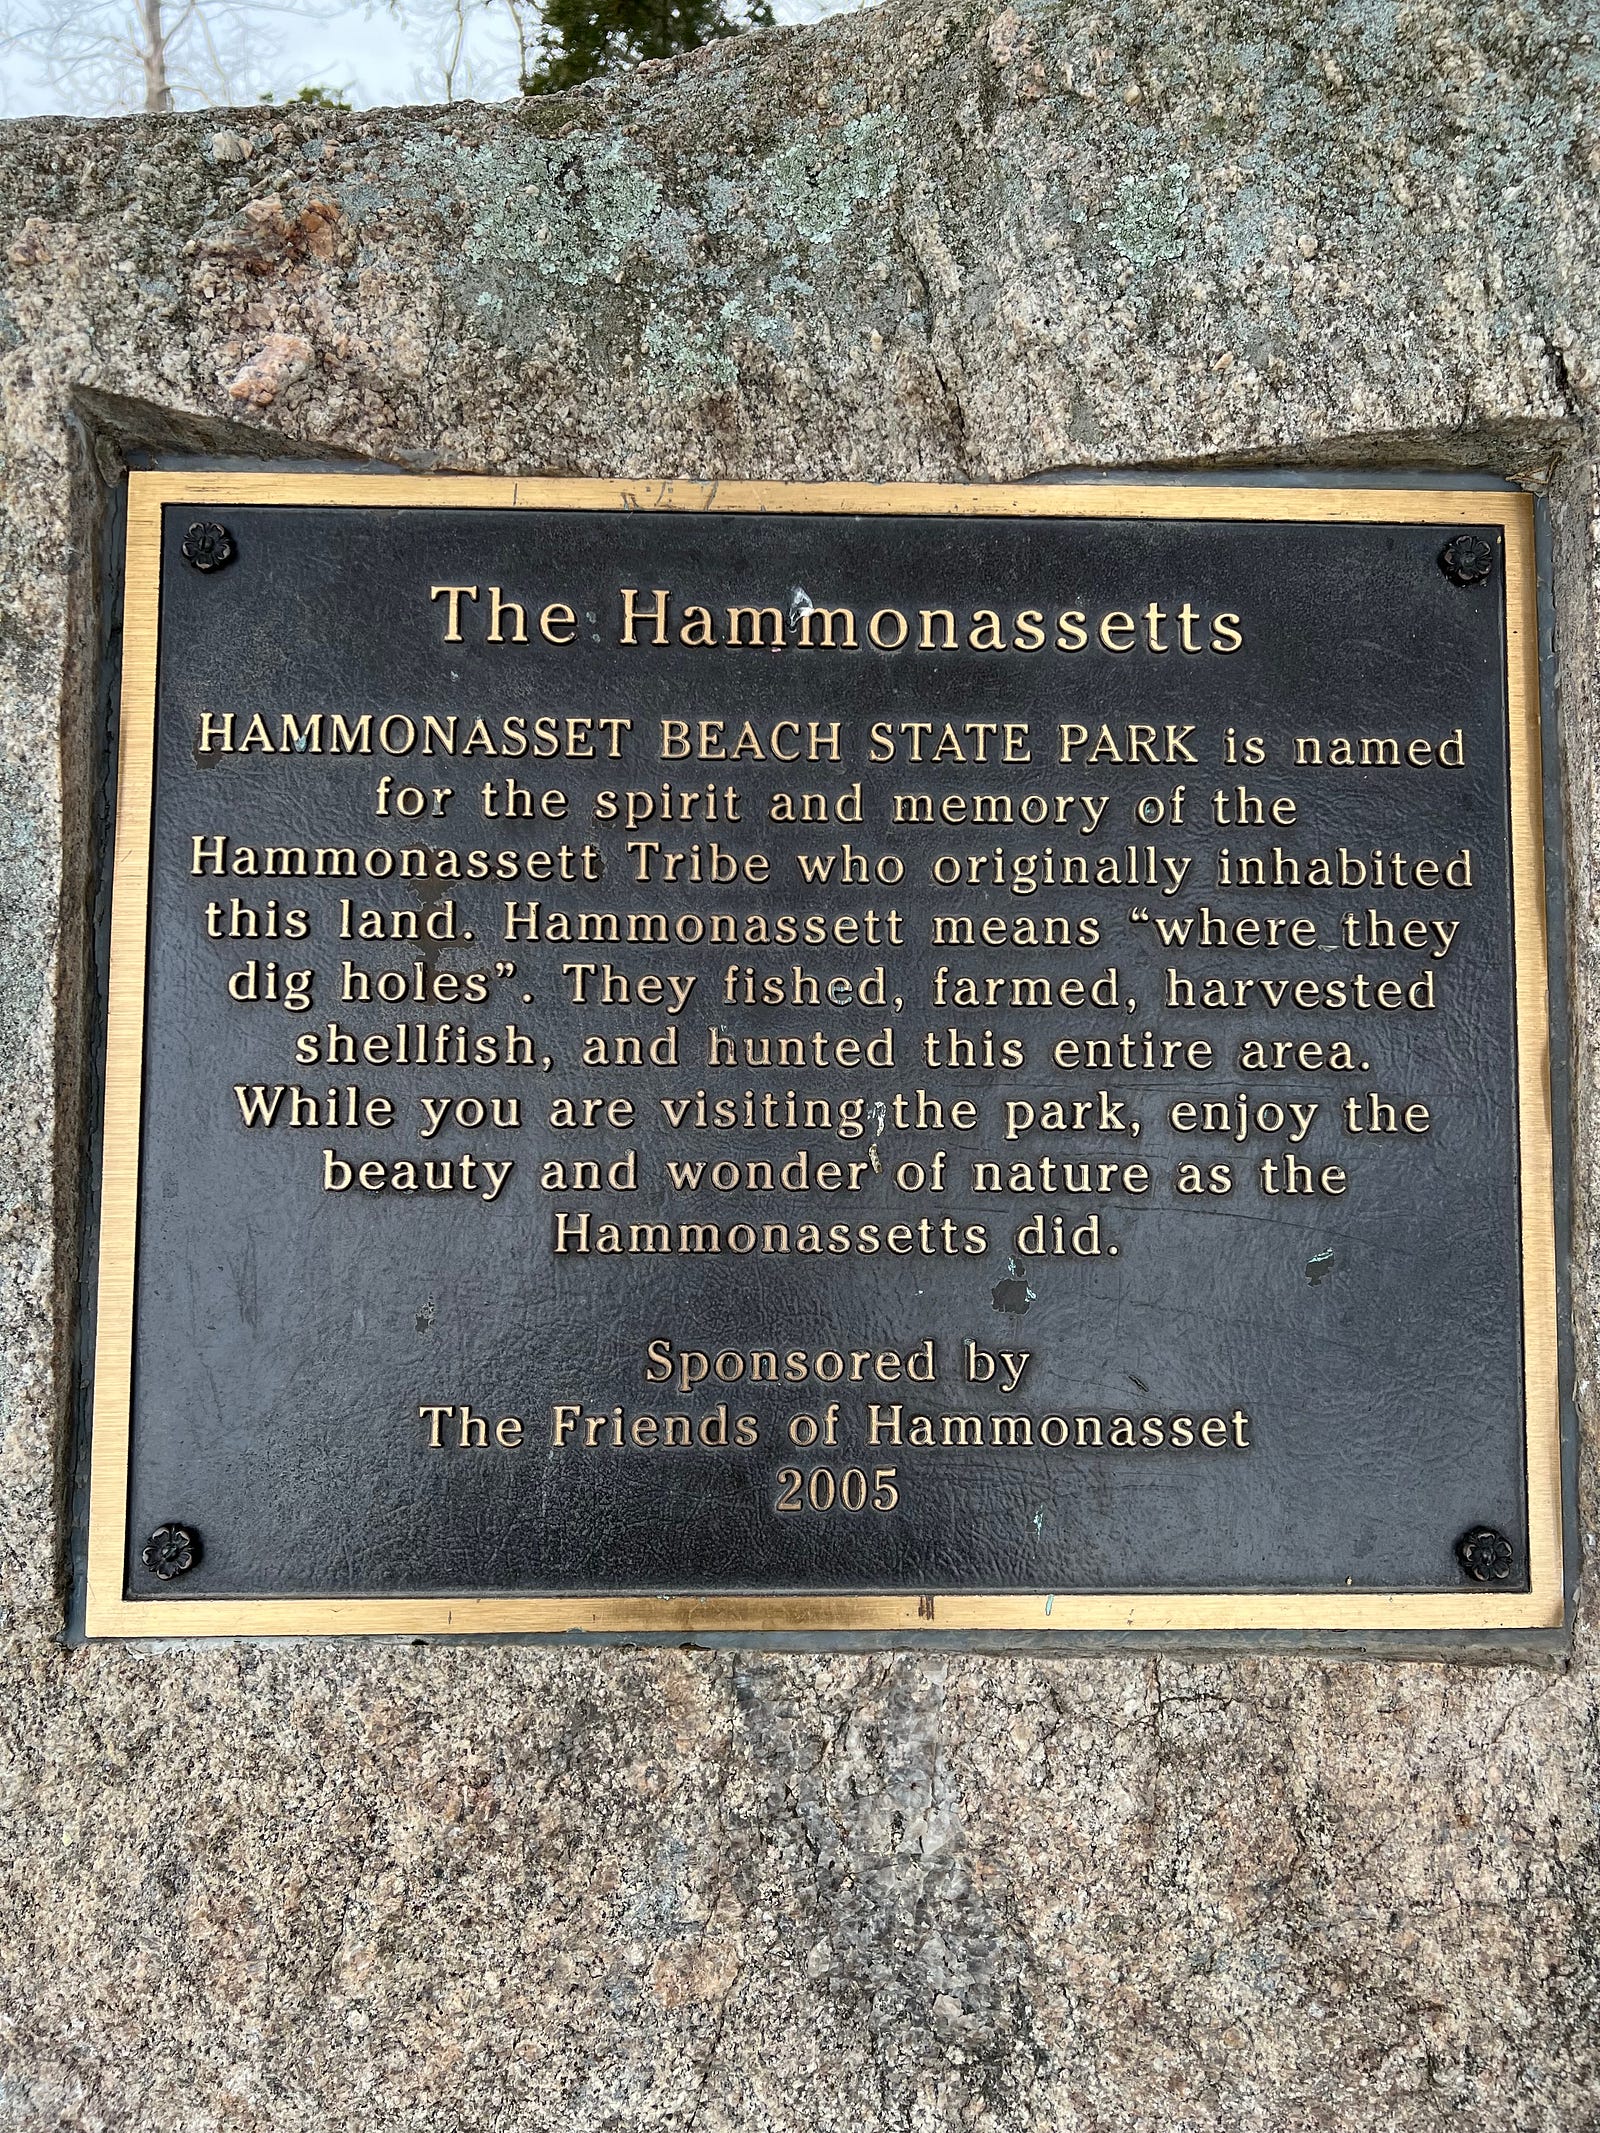 Photo of a plaque at Hammonassett Beach State Park in Madison, CT, commemorating the Hammonassett People who lived in the region before the coming of European colonists.